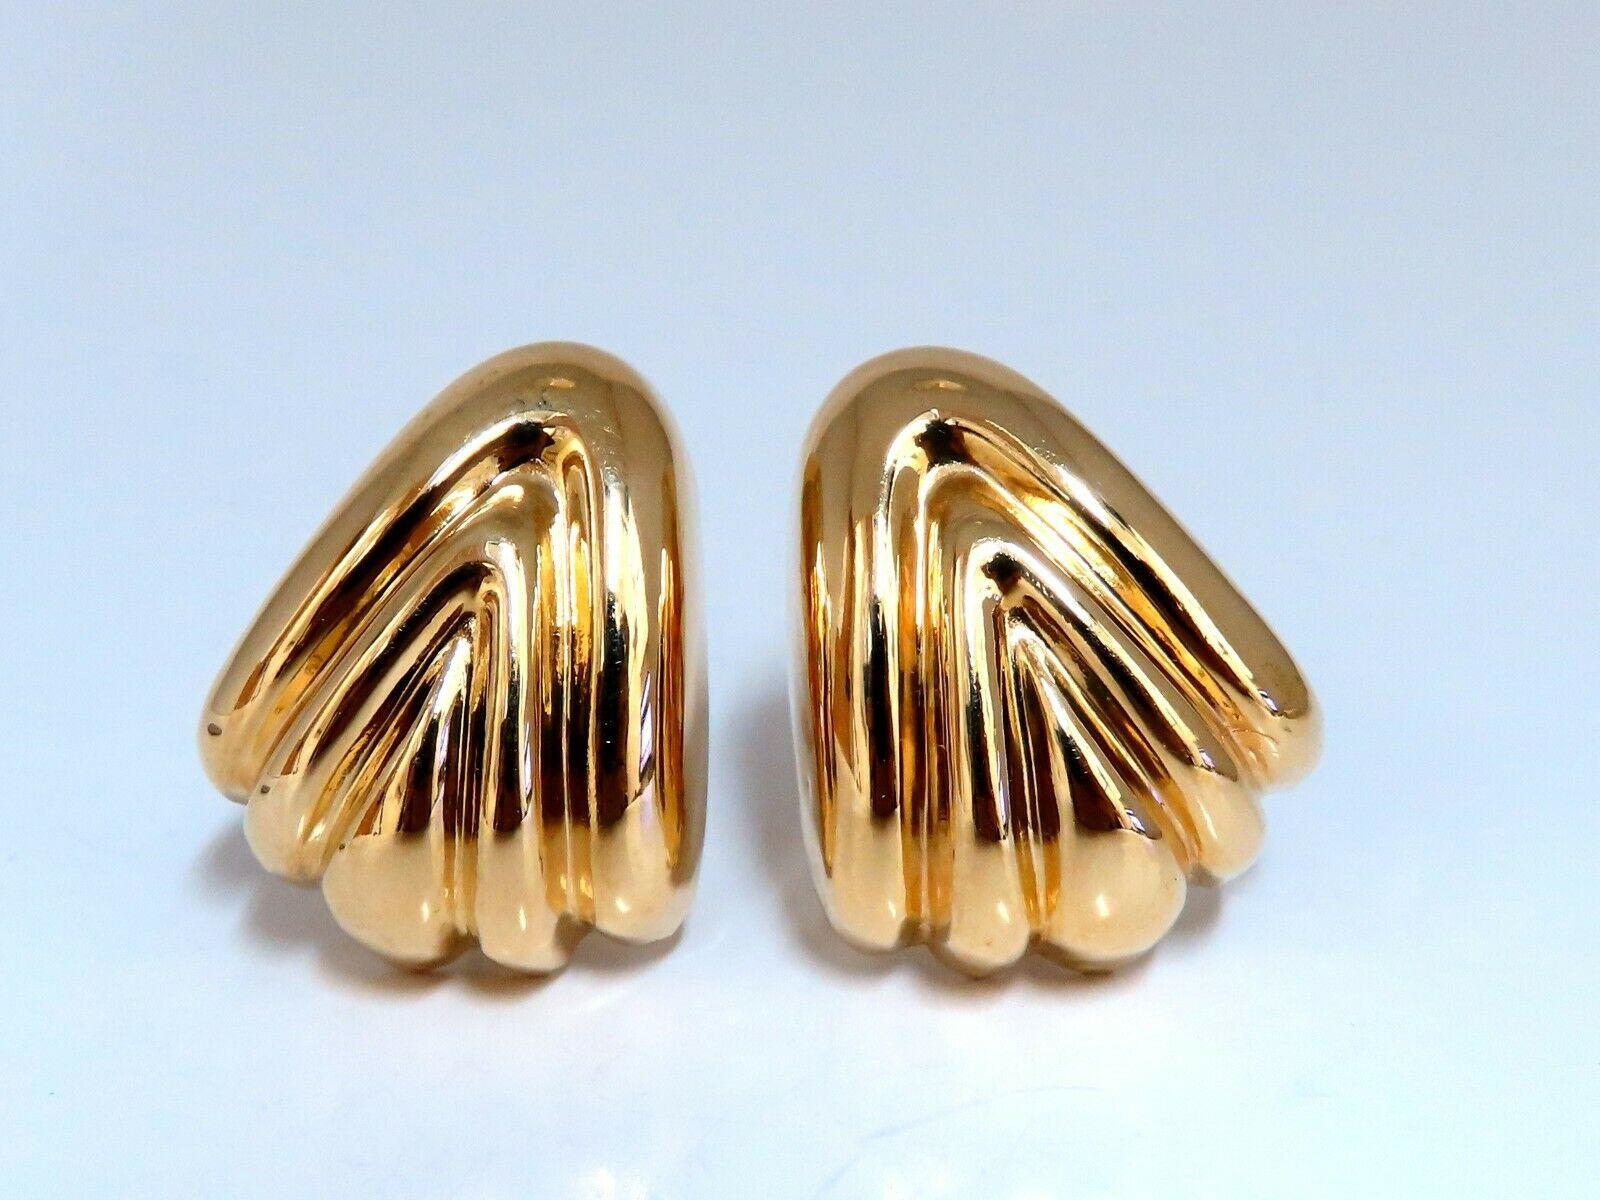 Textured Clip Earrings

Measurements of Earrings:

Measurements: 

1.1 x .91 Inch

Depth: .44inch

Comfortable Omega Clips

10.7 grams / 14kt. Yellow Gold

Earrings are gorgeous made